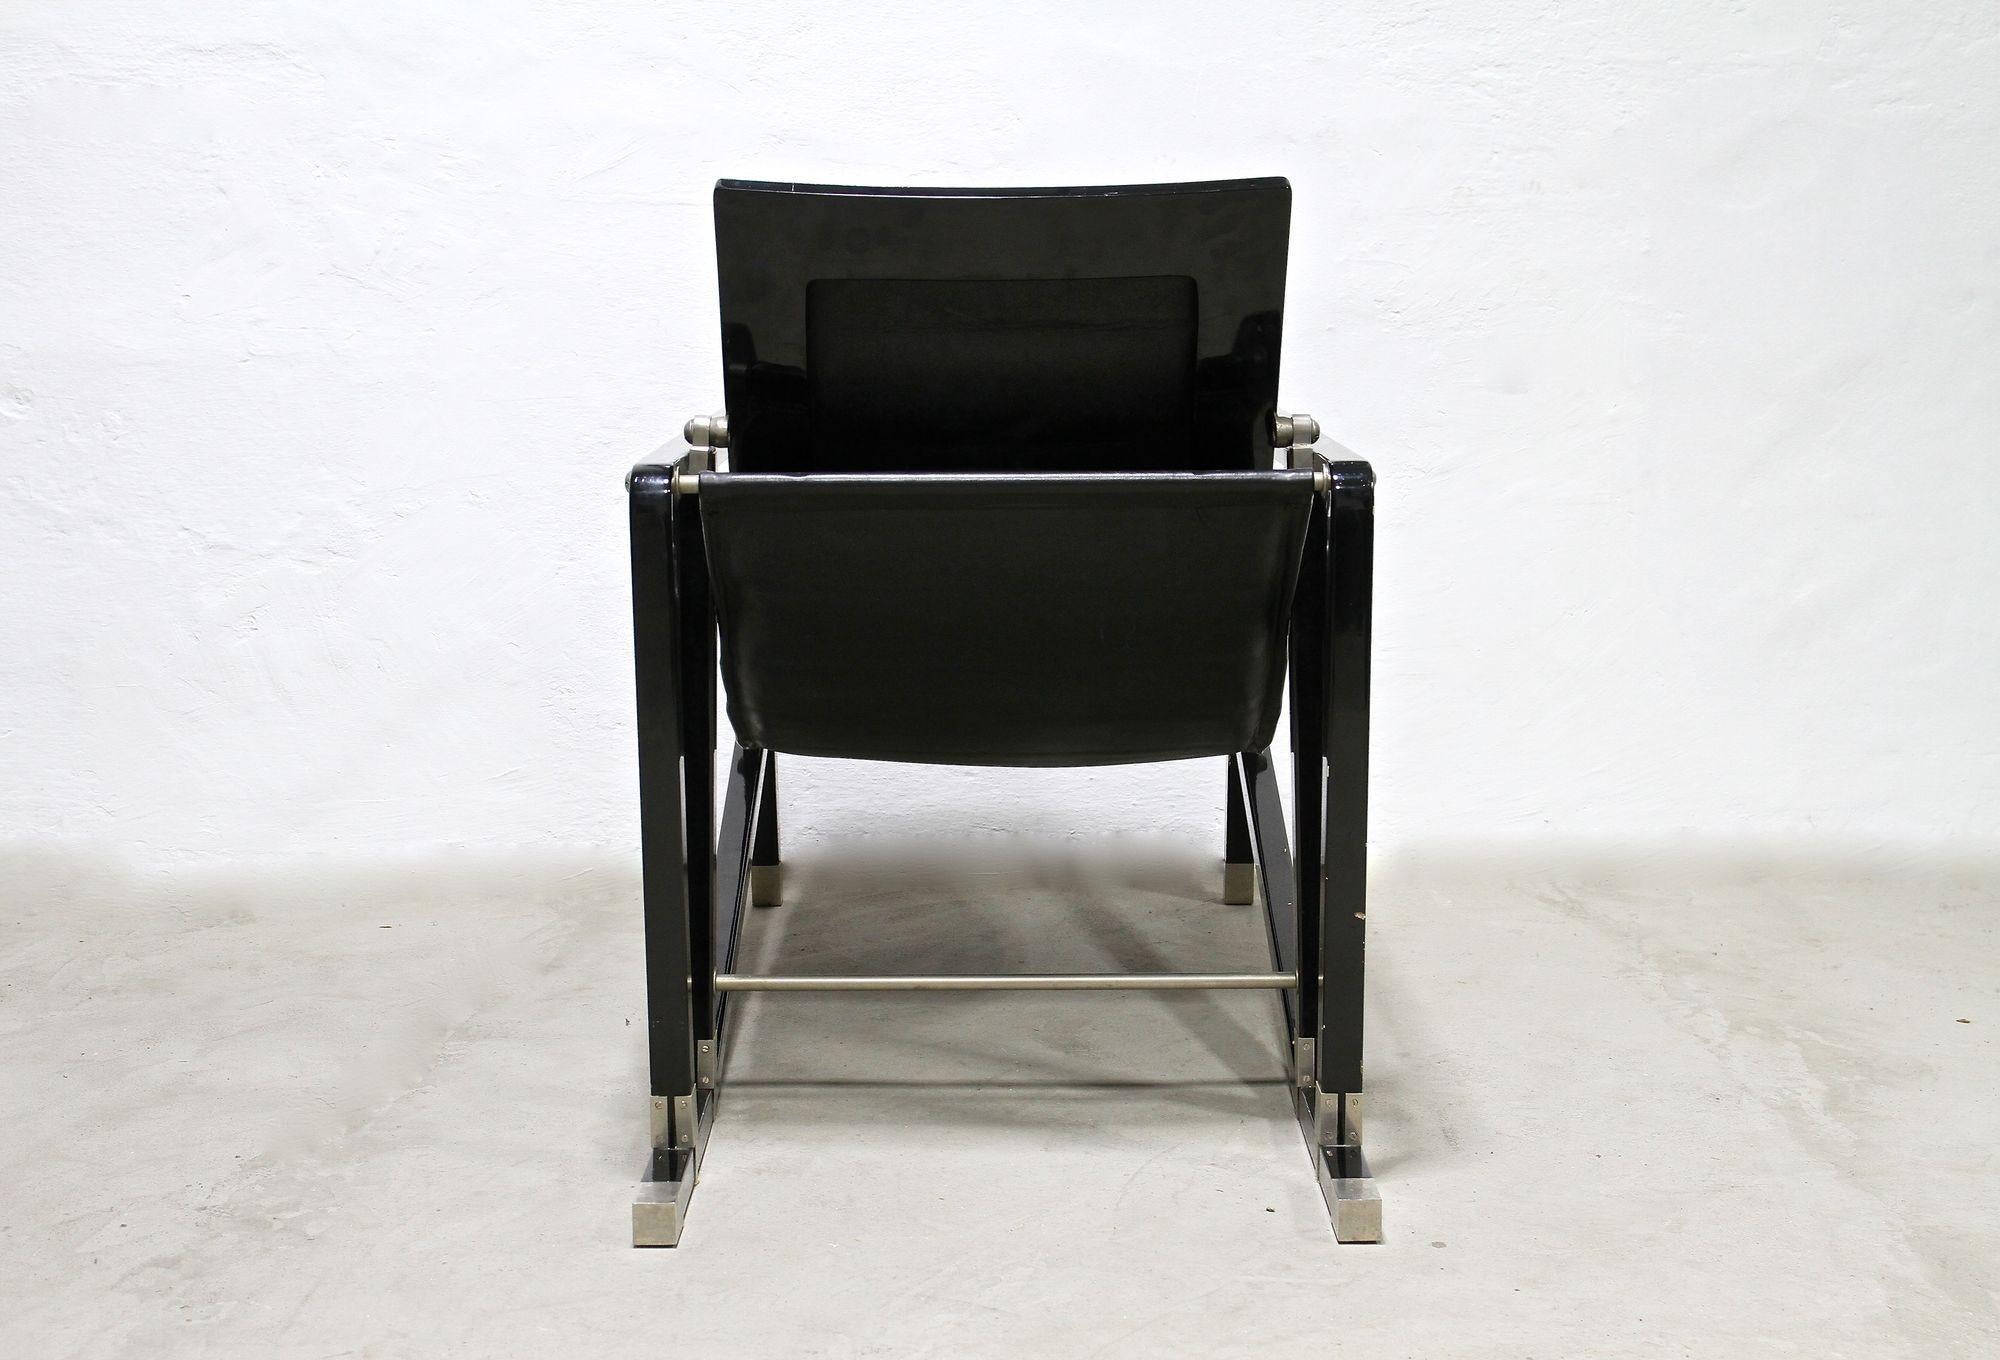 Transat Chair With Black Leather, Design Eileen Gray 1927, France ca. 1975 For Sale 3